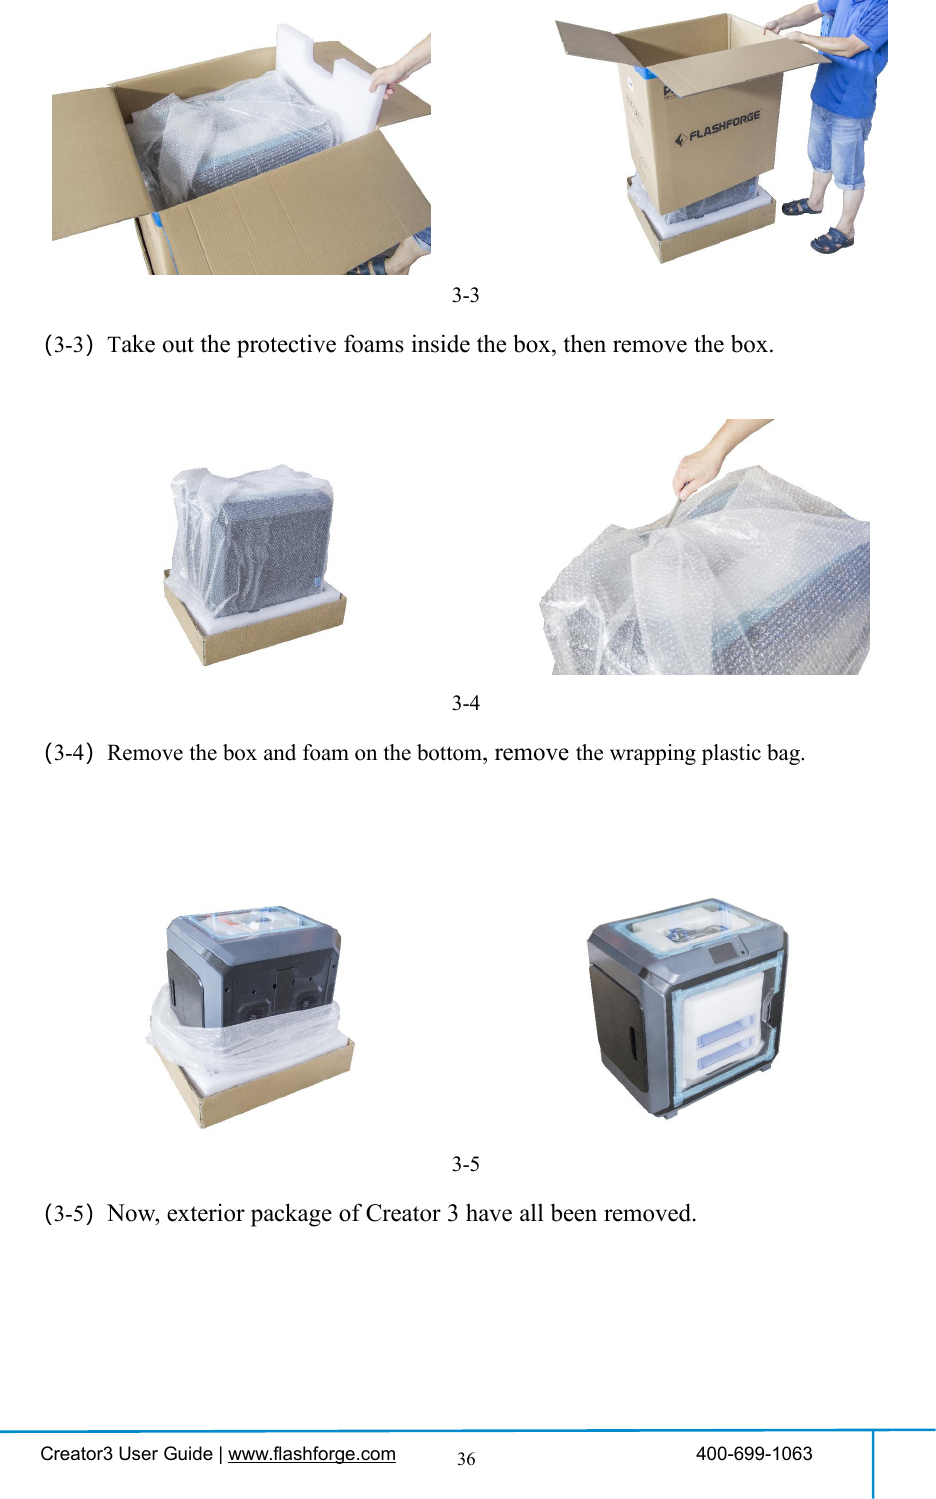 Creator3 User Guide | www.flashforge.com 400-699-1063363-3（3-3）Take out the protective foams inside the box, then remove the box.3-4（3-4）Remove the box and foam on the bottom, remove the wrapping plastic bag.3-5（3-5）Now, exterior package of Creator 3 have all been removed.